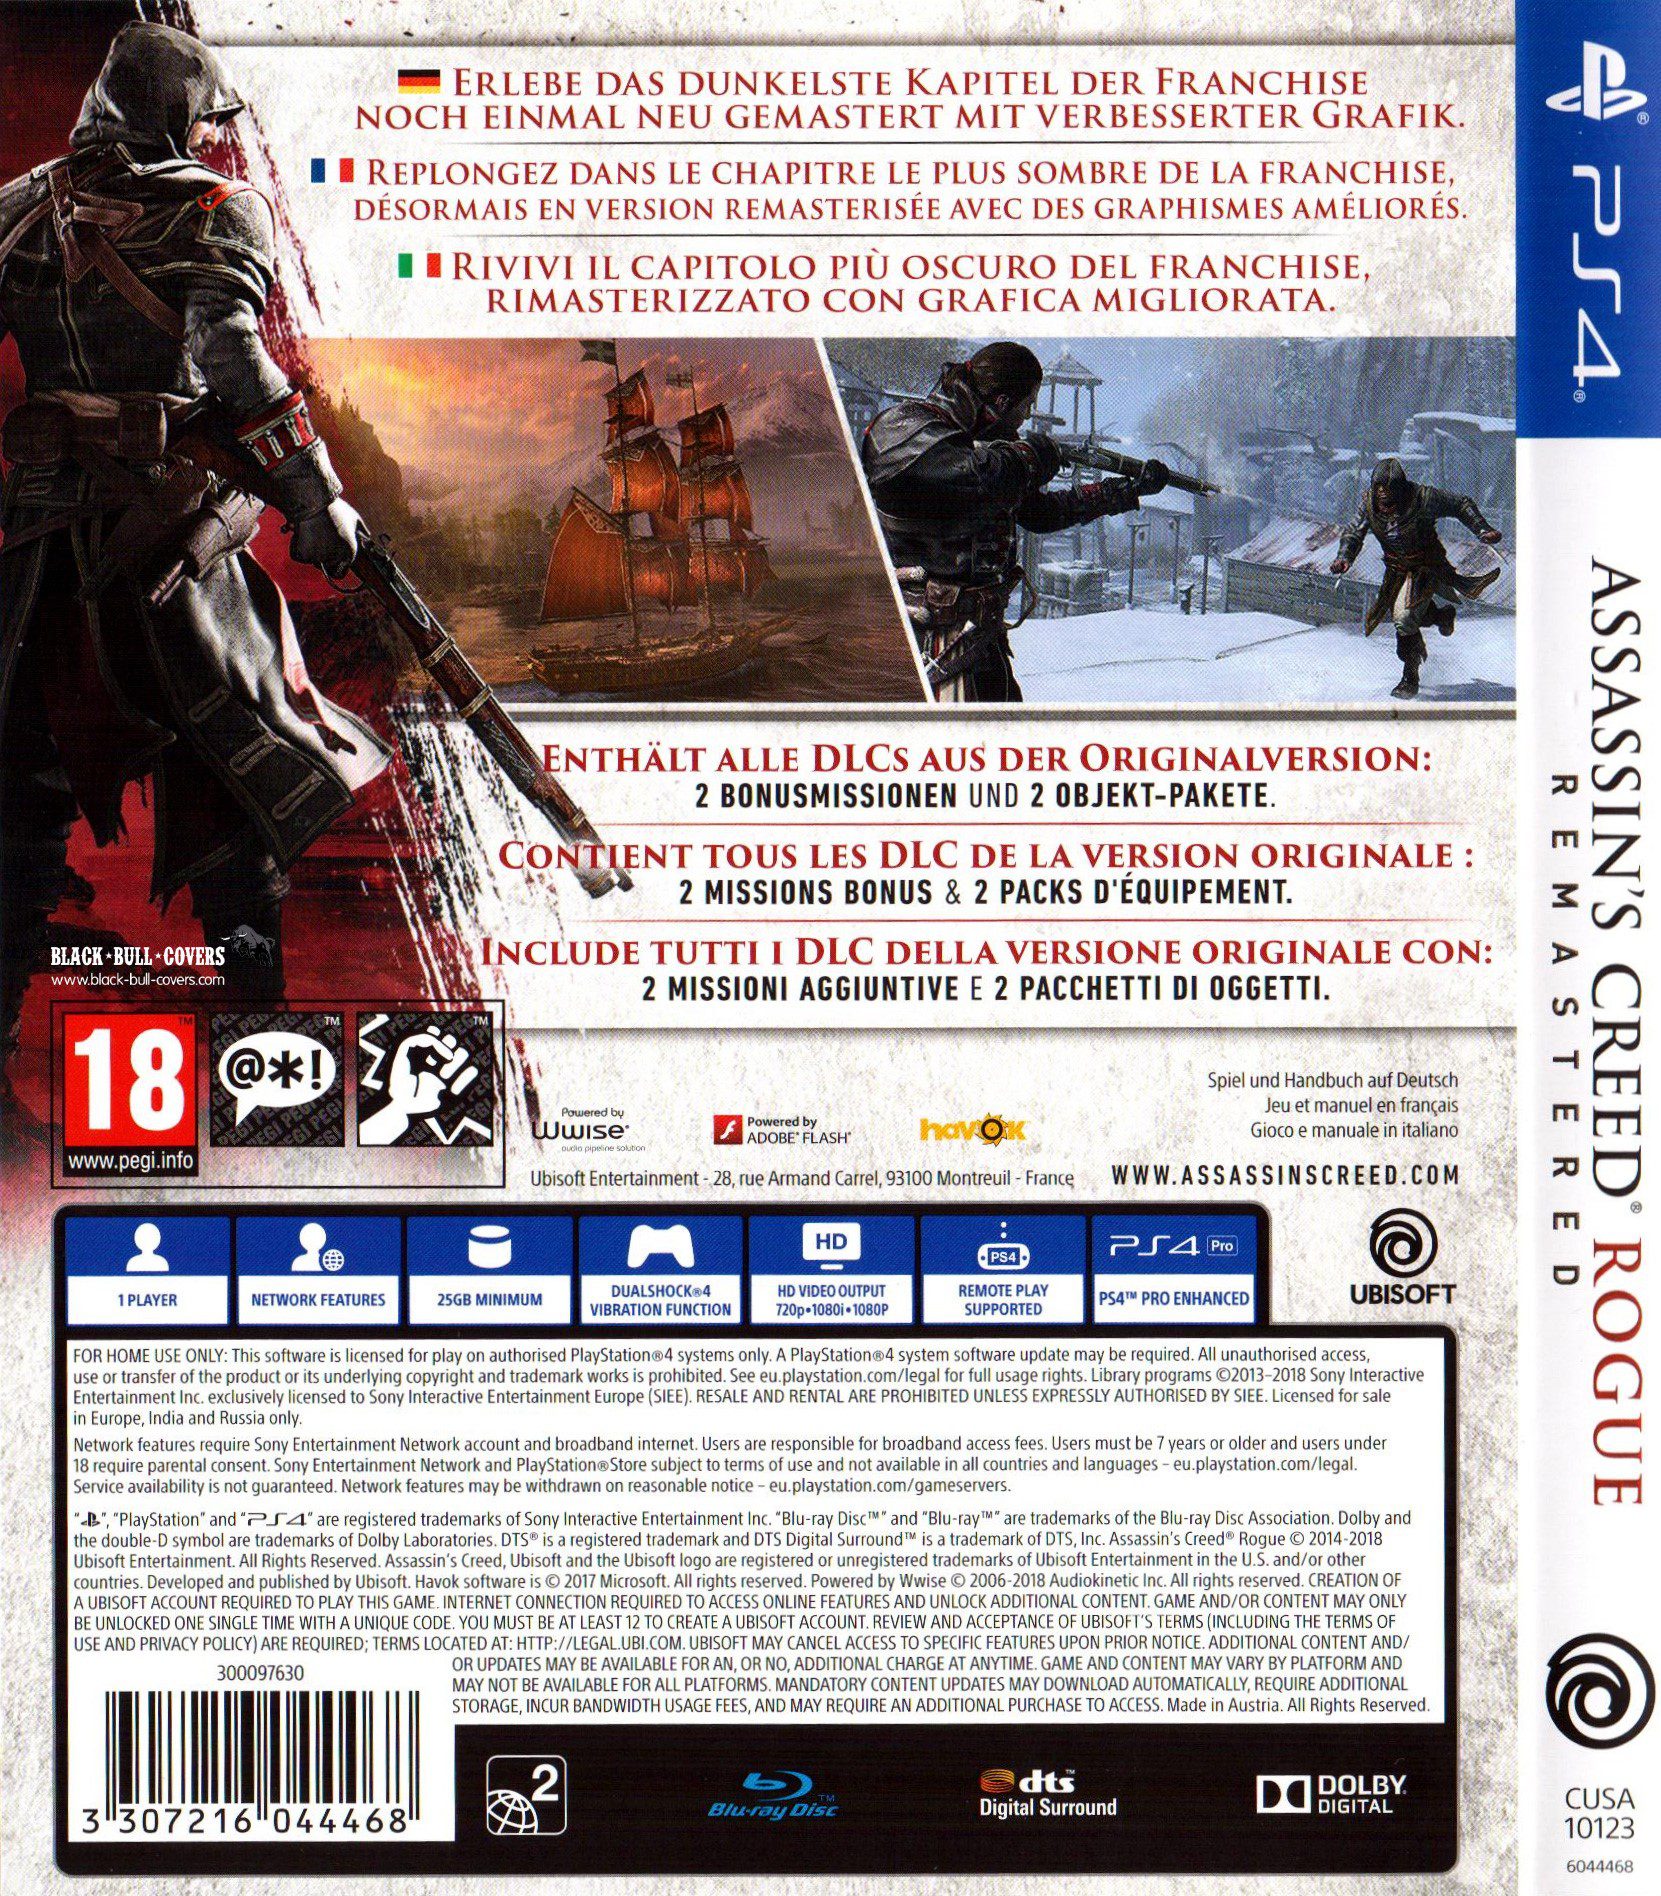 Assassin’s Creed: Rogue Remastered PS4